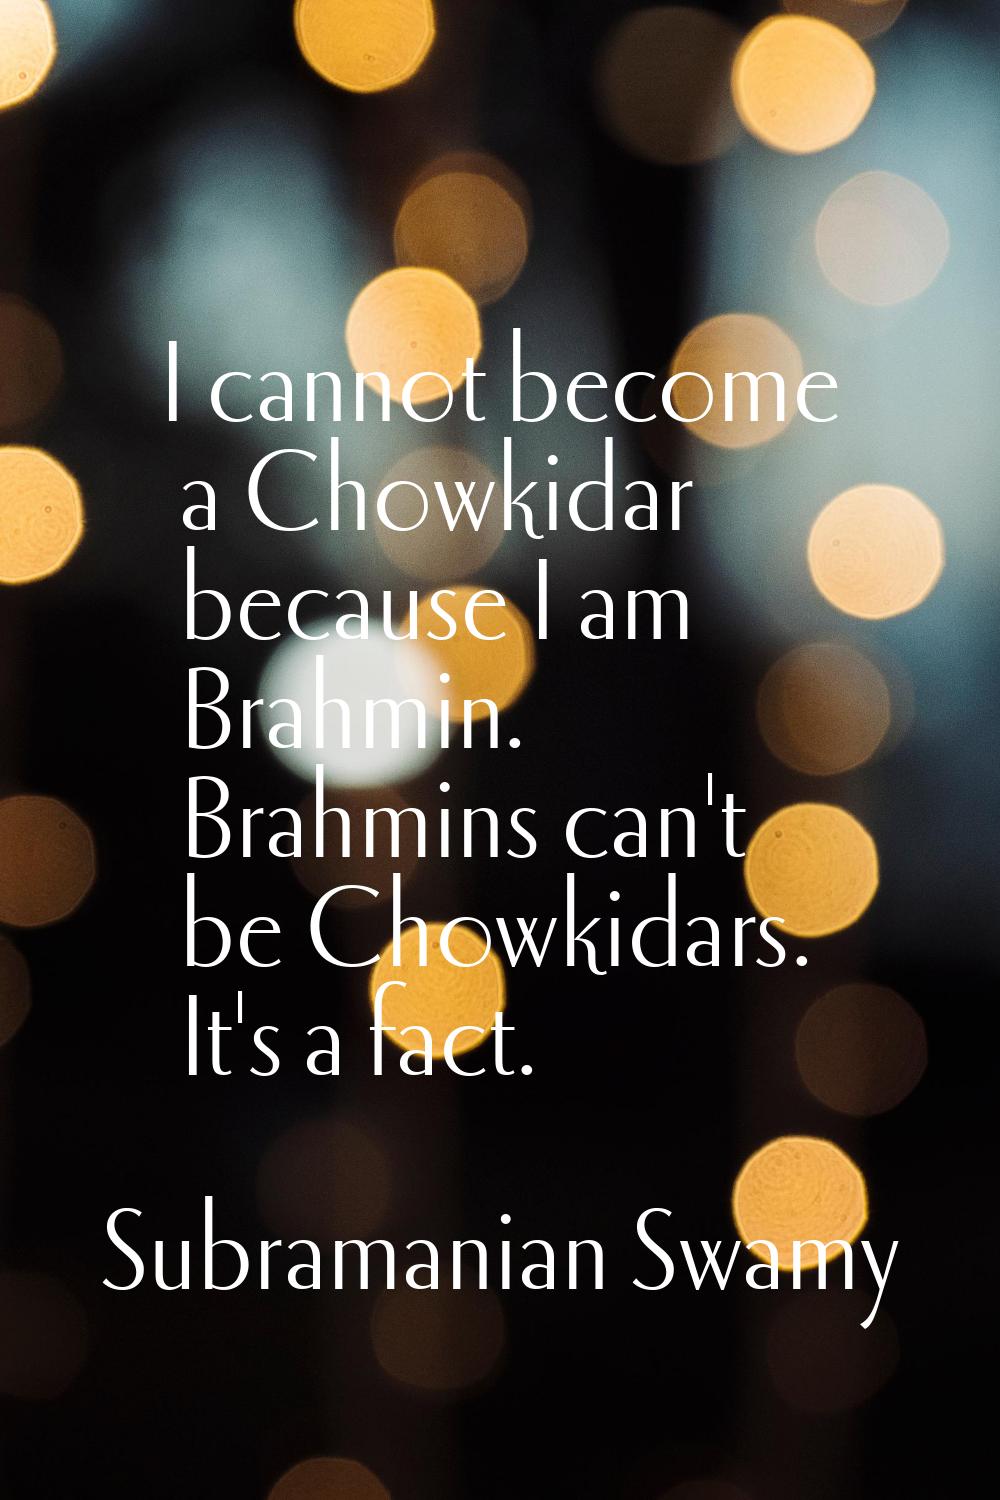 I cannot become a Chowkidar because I am Brahmin. Brahmins can't be Chowkidars. It's a fact.